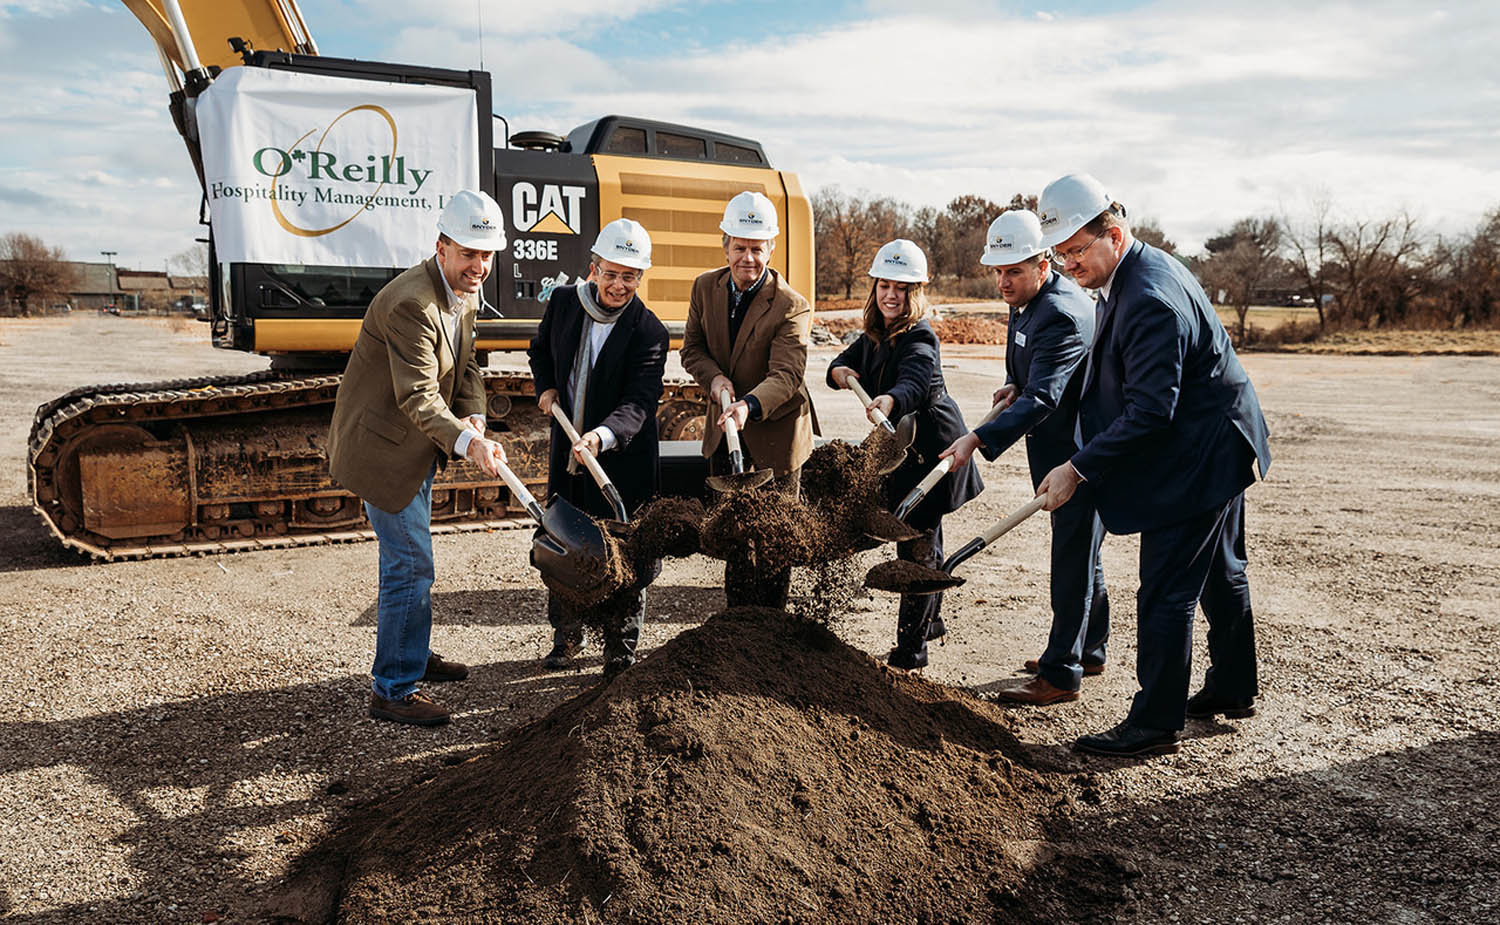 BIG GROUND TO COVER
Officials break ground Nov. 22 for O’Reilly Hospitality Management LLC’s BigShots Golf development near the corner of Kearney Street and Glenstone Avenue. Plans call for 56 driving bays on two stories, 3,500 square feet of meeting space, an outdoor putting green, golf academy for year-round training and a full restaurant. Pictured, left to right, are Donnie Volentine, operations manager with contractor Larry Snyder & Co.; Bill George, OHM project manager; Tim O’Reilly, OHM CEO and managing partner; state Rep. Crystal Quade; Matt Hudson of the North Springfield Betterment Association; and Bob Dixon, Greene County presiding commissioner.